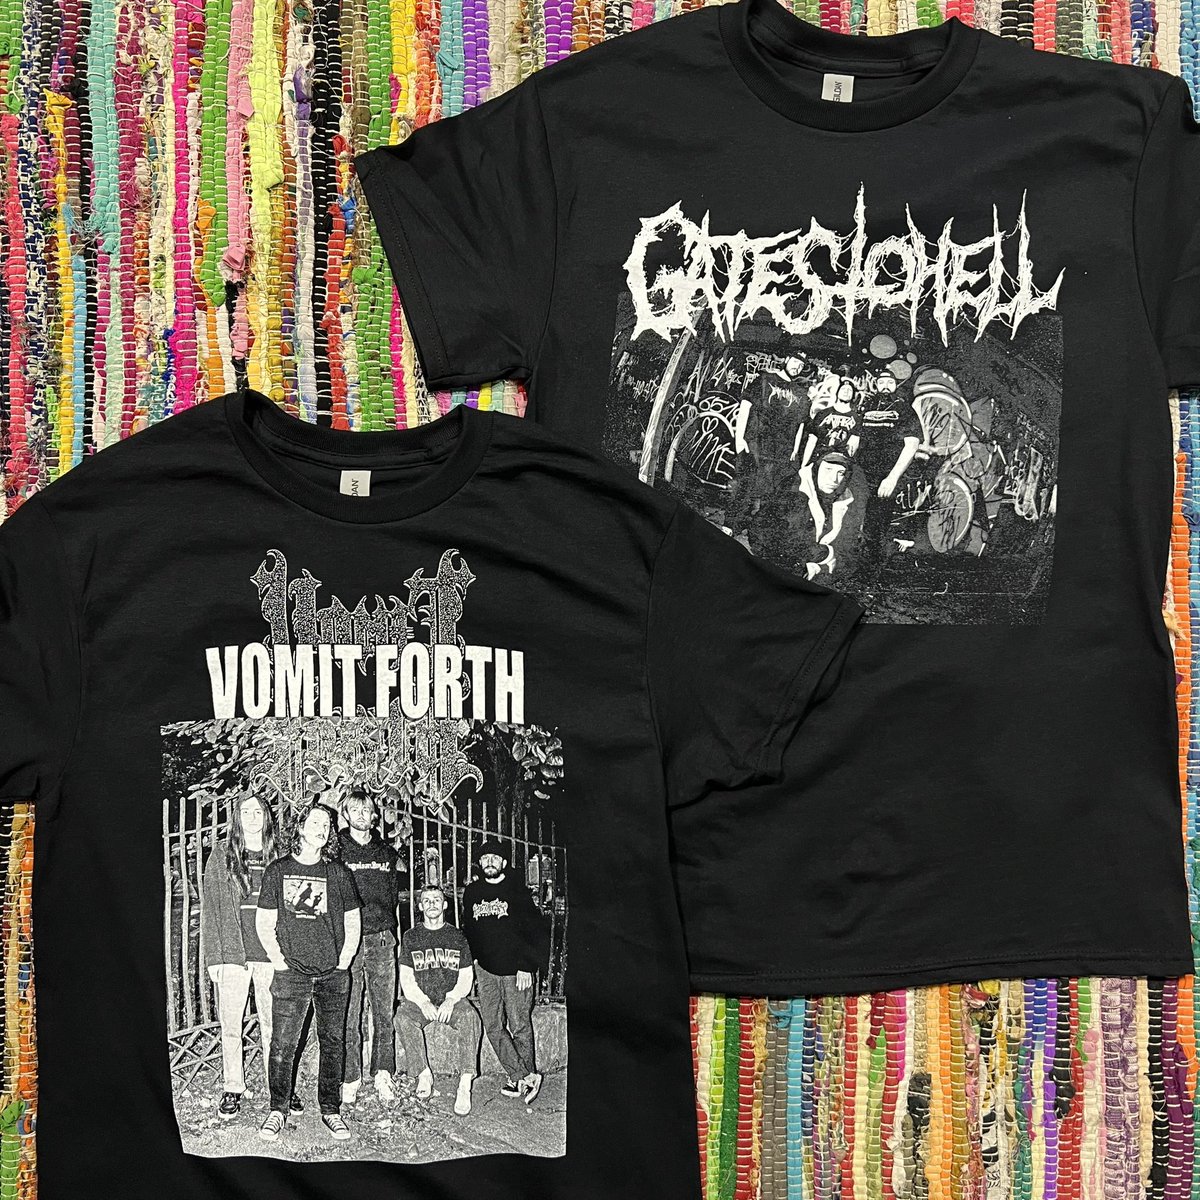 New shirts for Vomit Forth and us starting tomorrow.